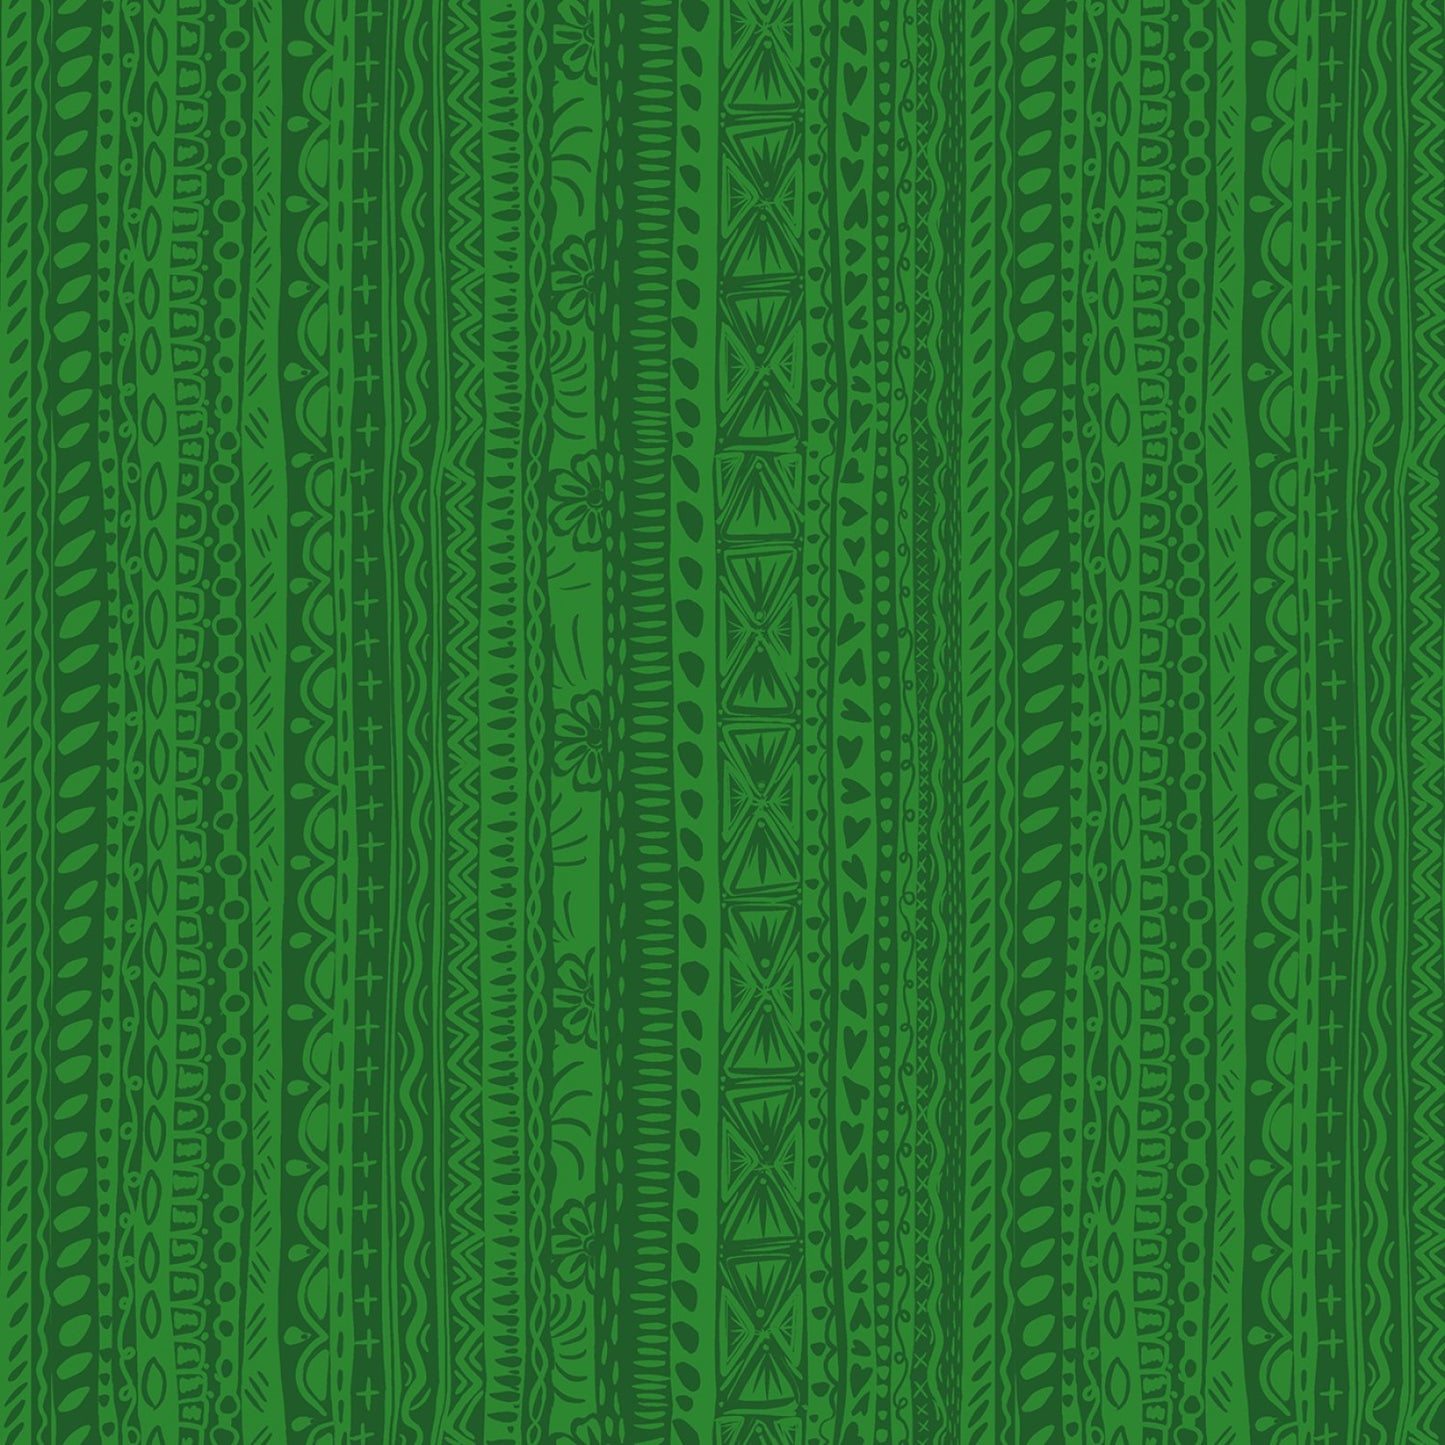 Amor Eterno by Crafty Chica Stripes Green    C11814R-GREEN Cotton Woven Fabric